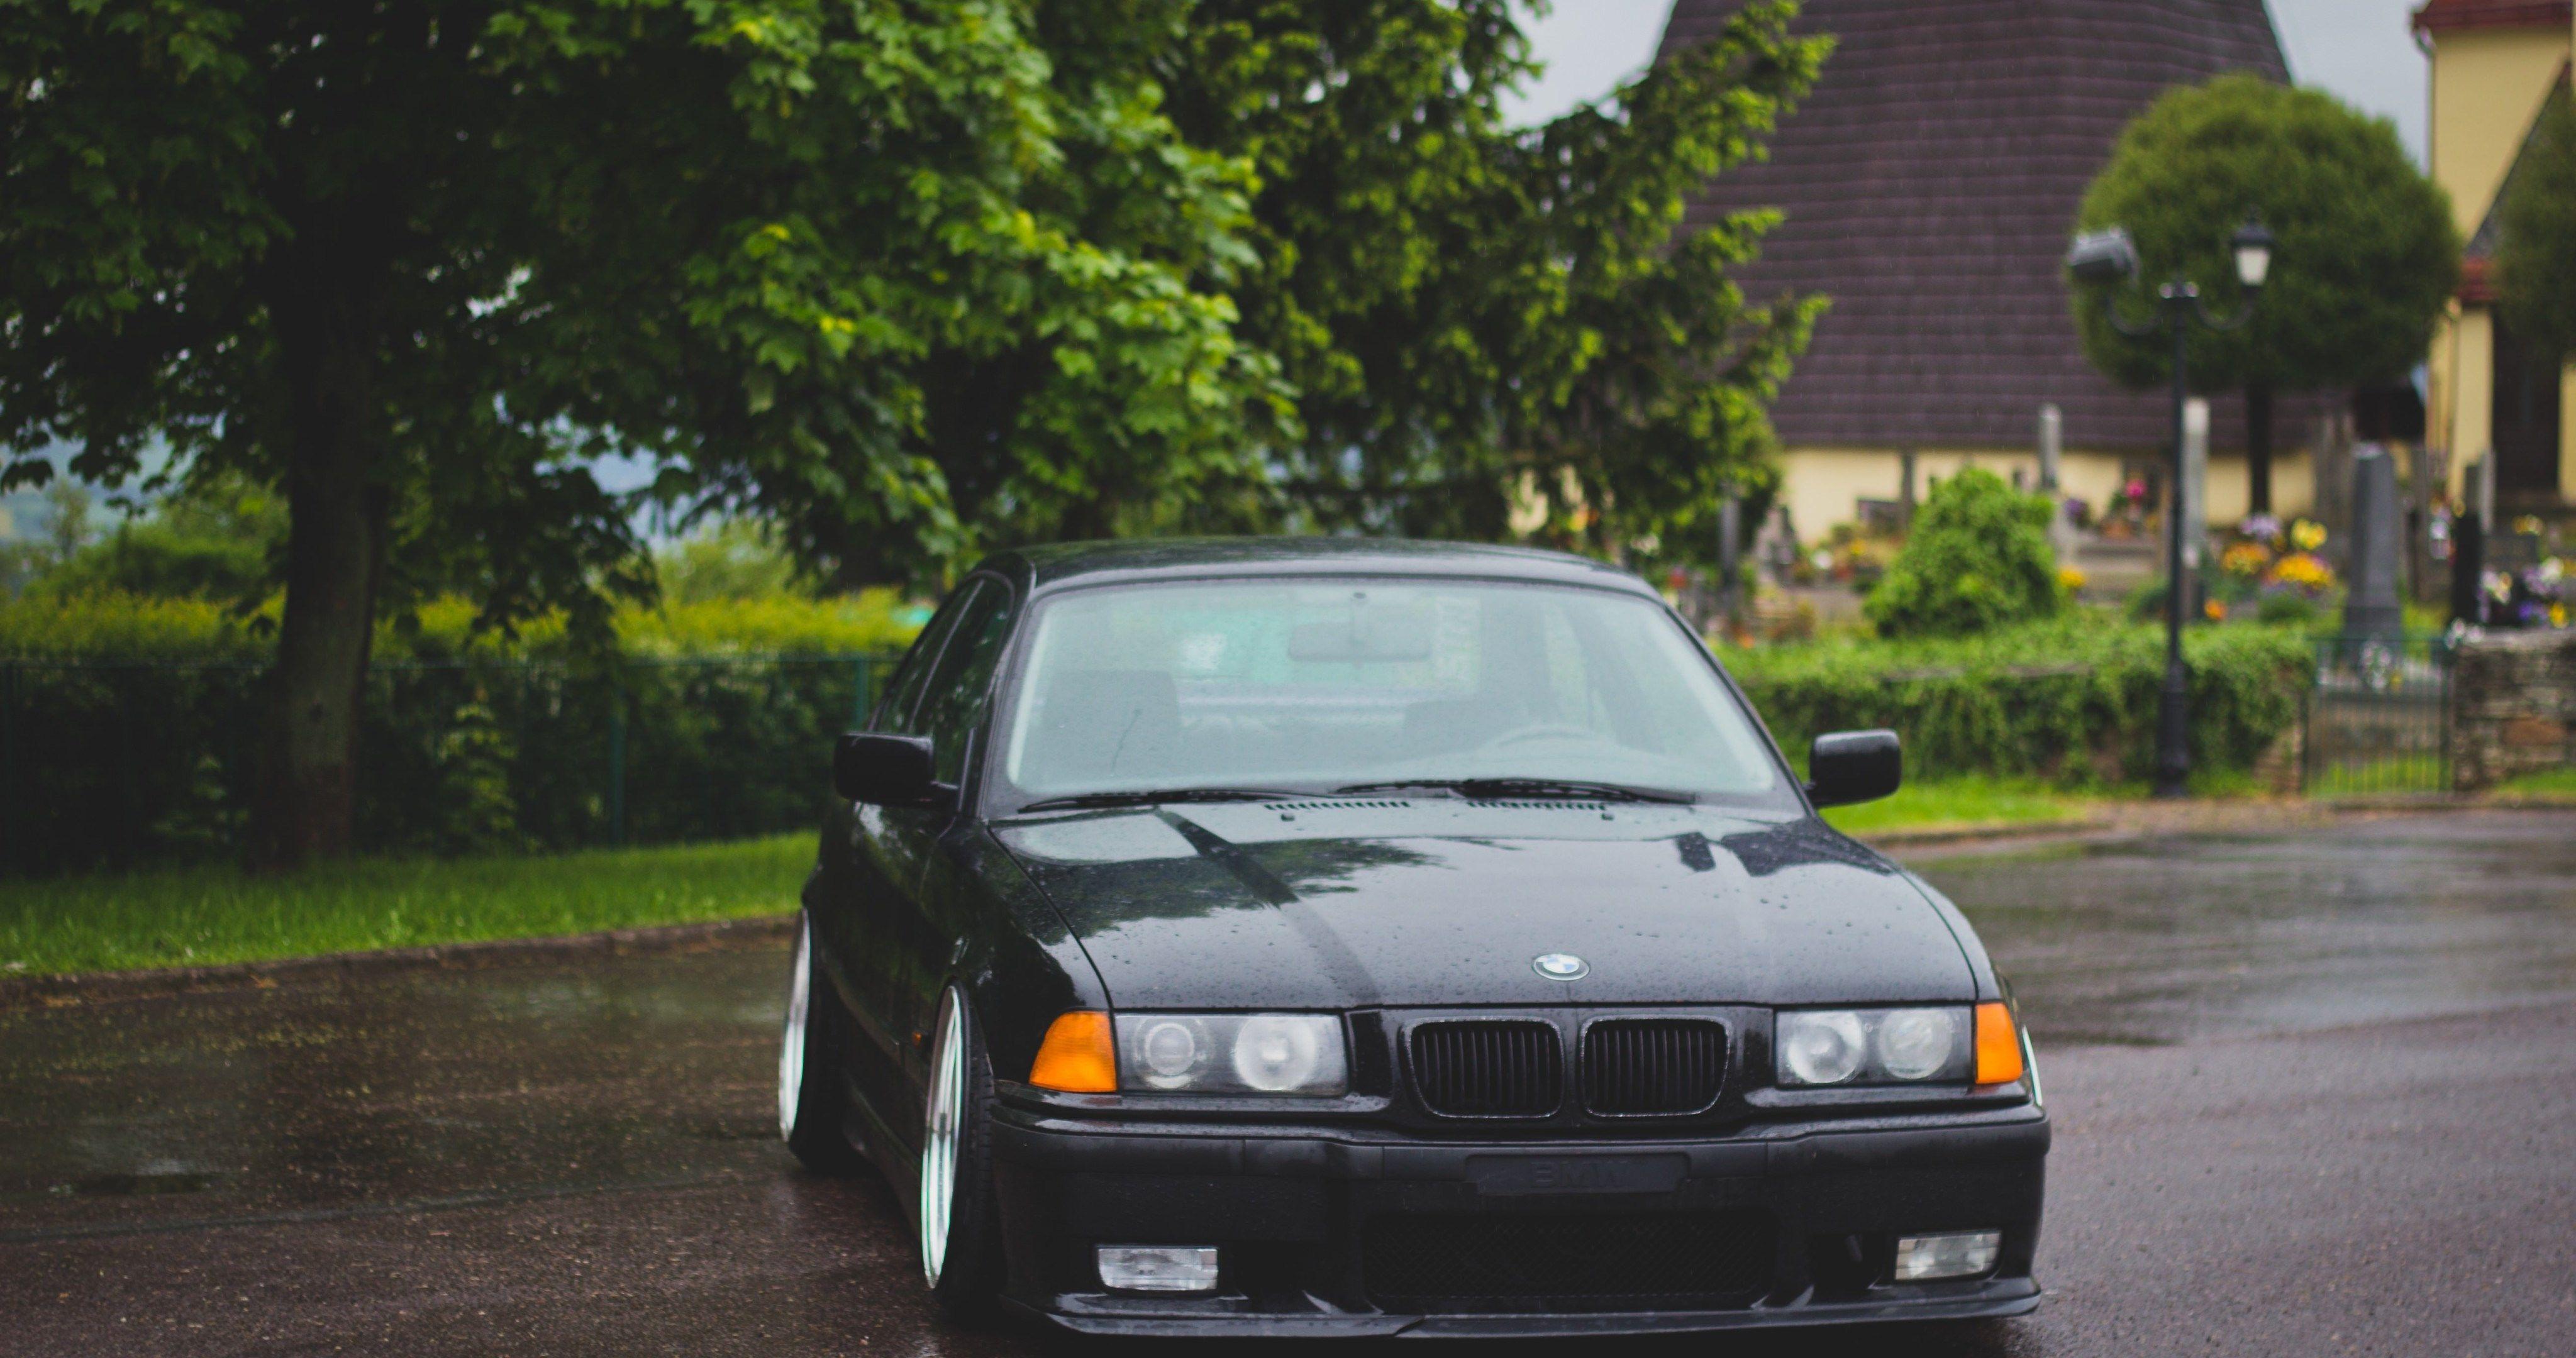 E36 M3 Wallpapers Top Free E36 M3 Backgrounds Wallpaperaccess